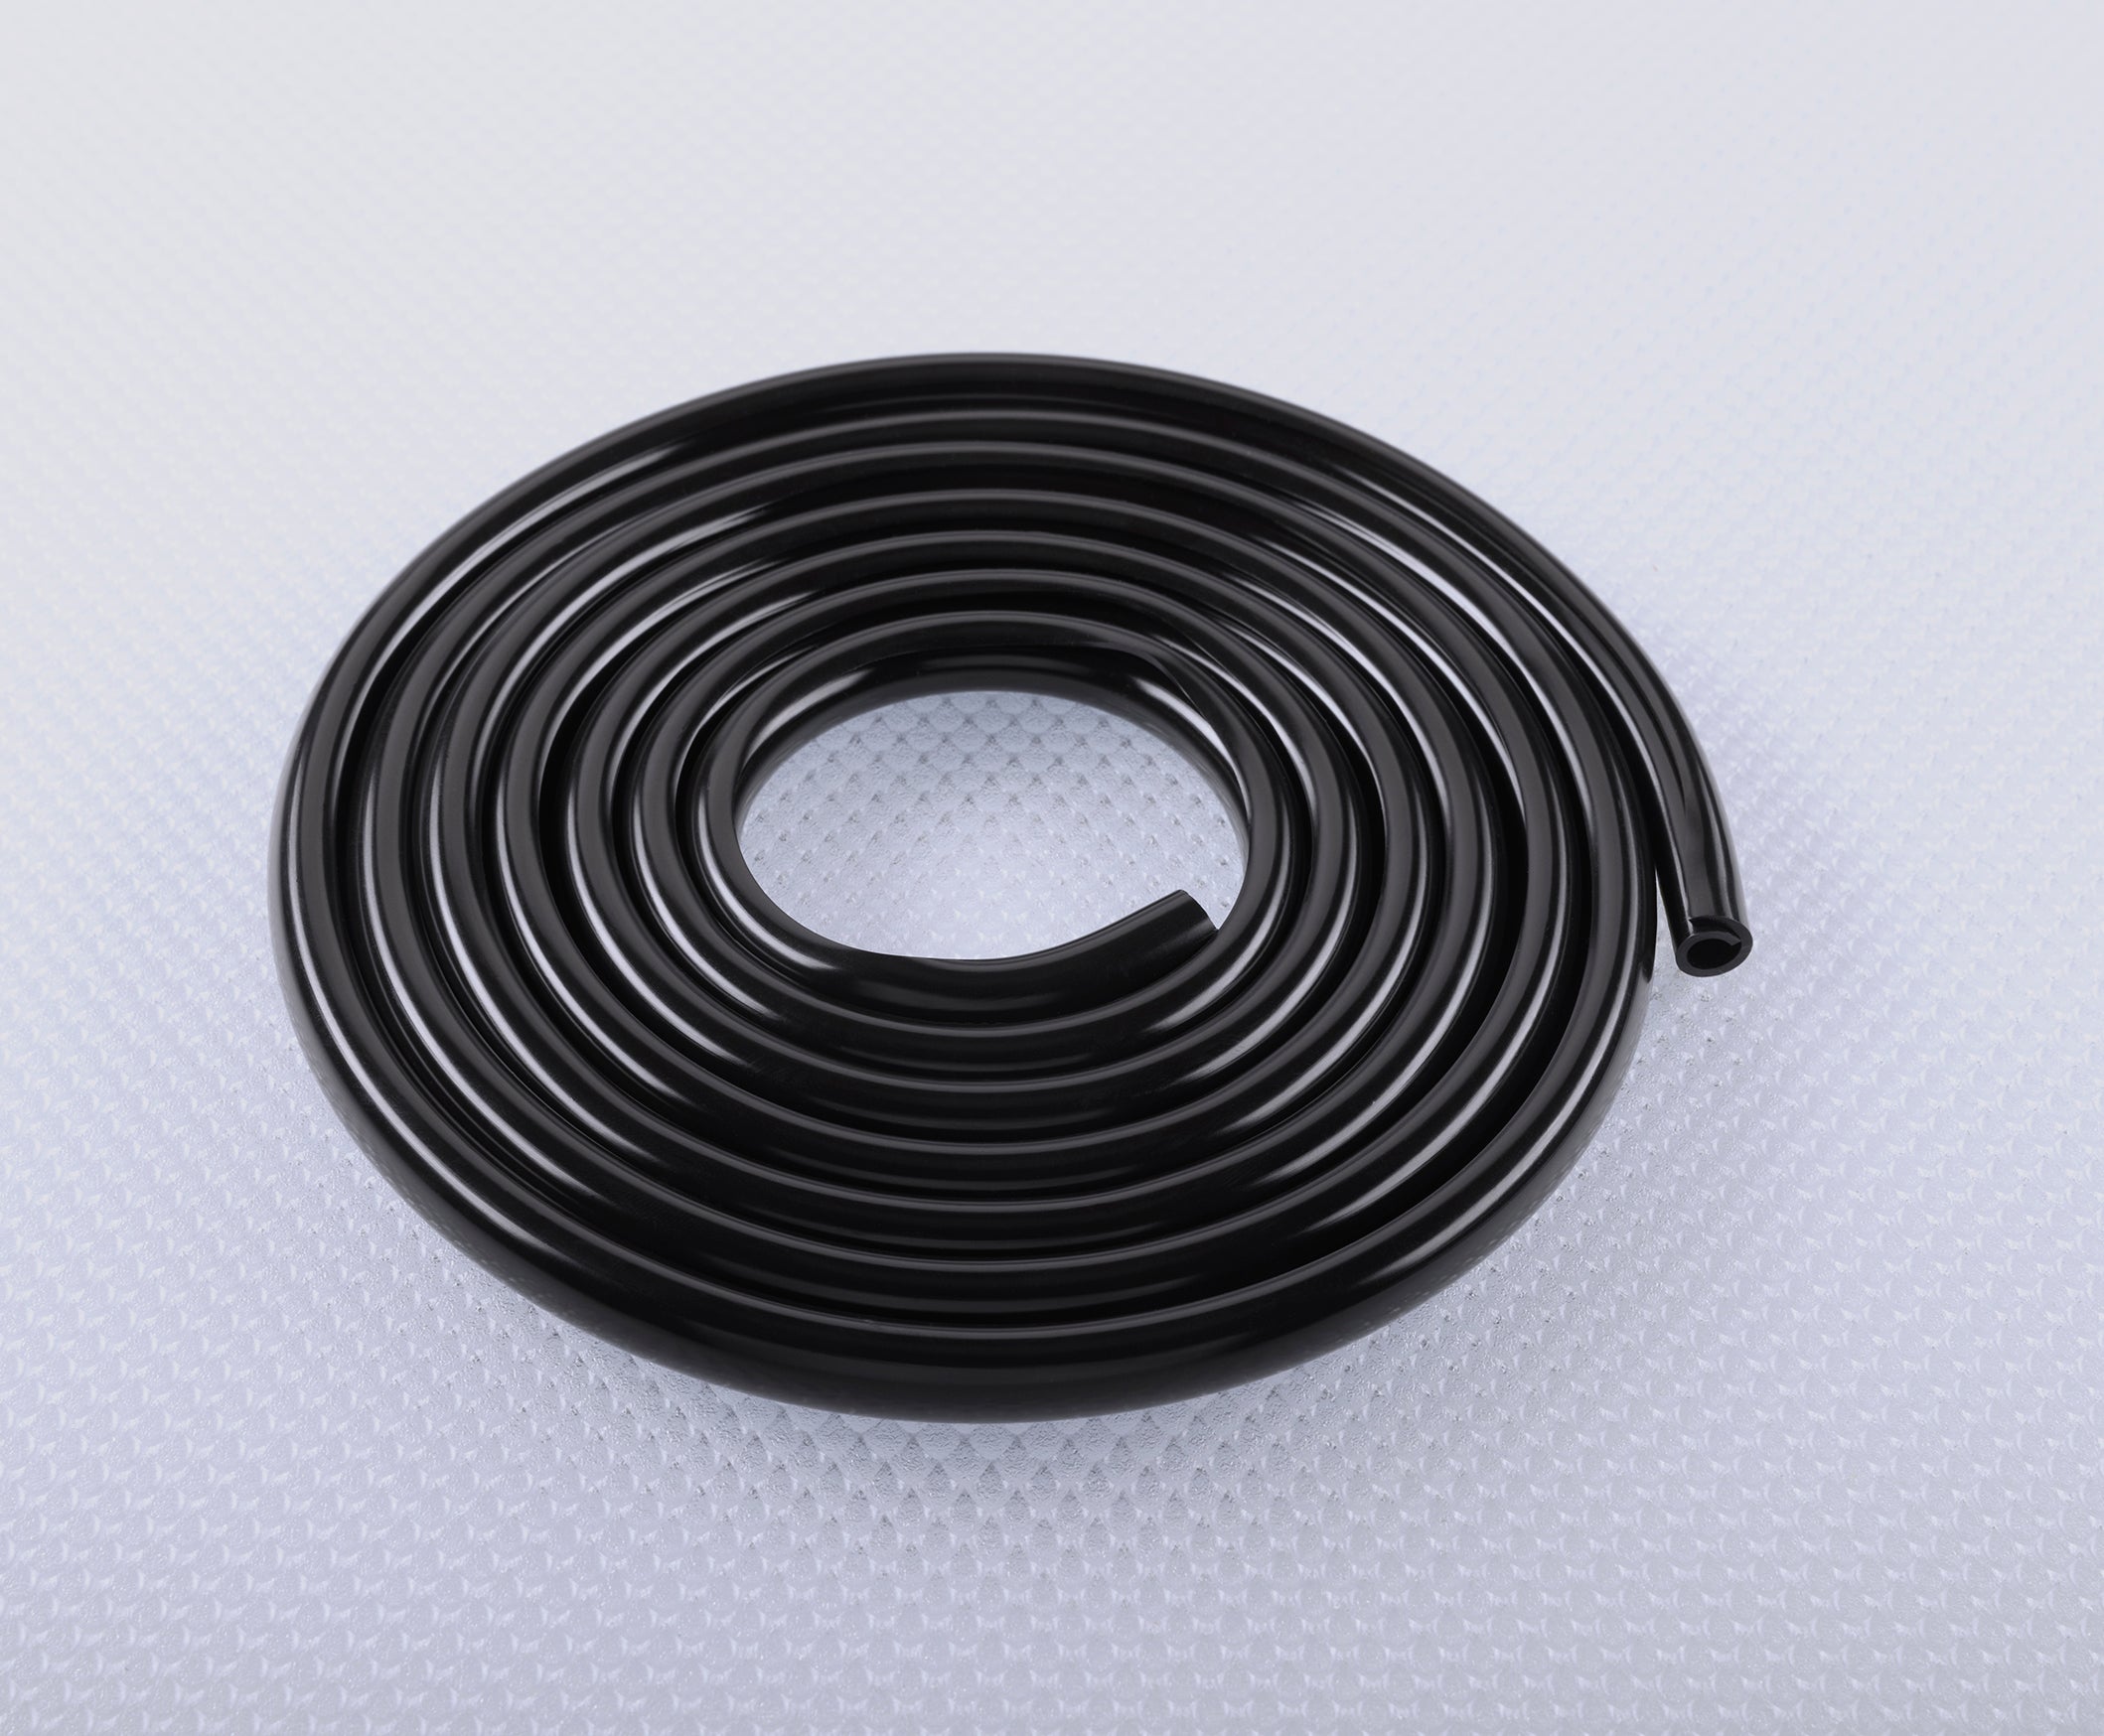 Cord Protectors from Pets, Clear Wire Protector Tubing Keeps Your Cats Safe  from Dangerous, Chew Proof, Flexible